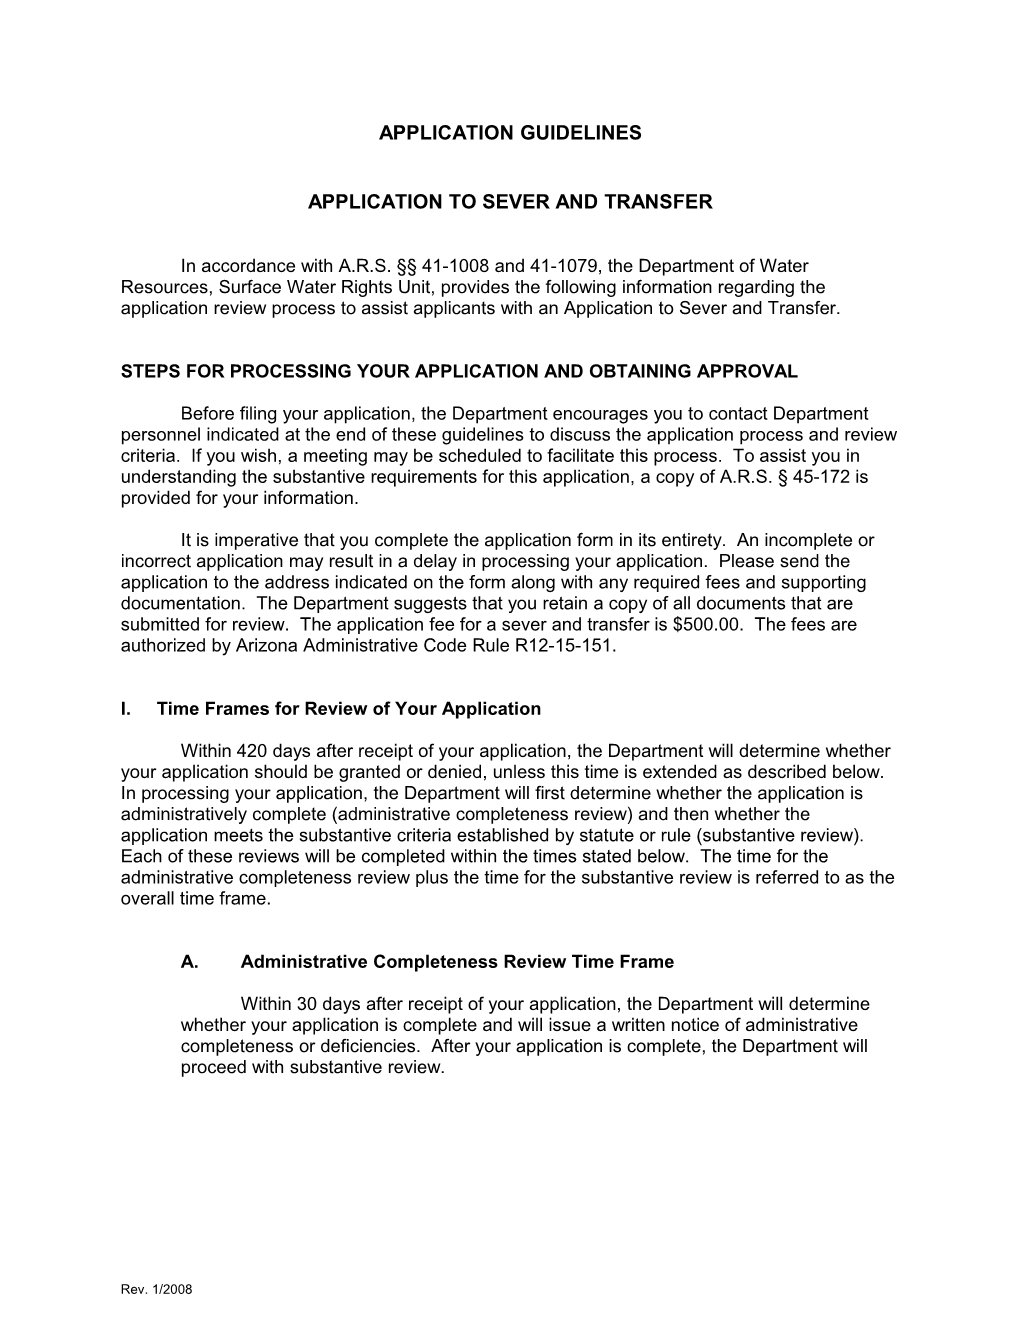 Application to Sever and Transfer